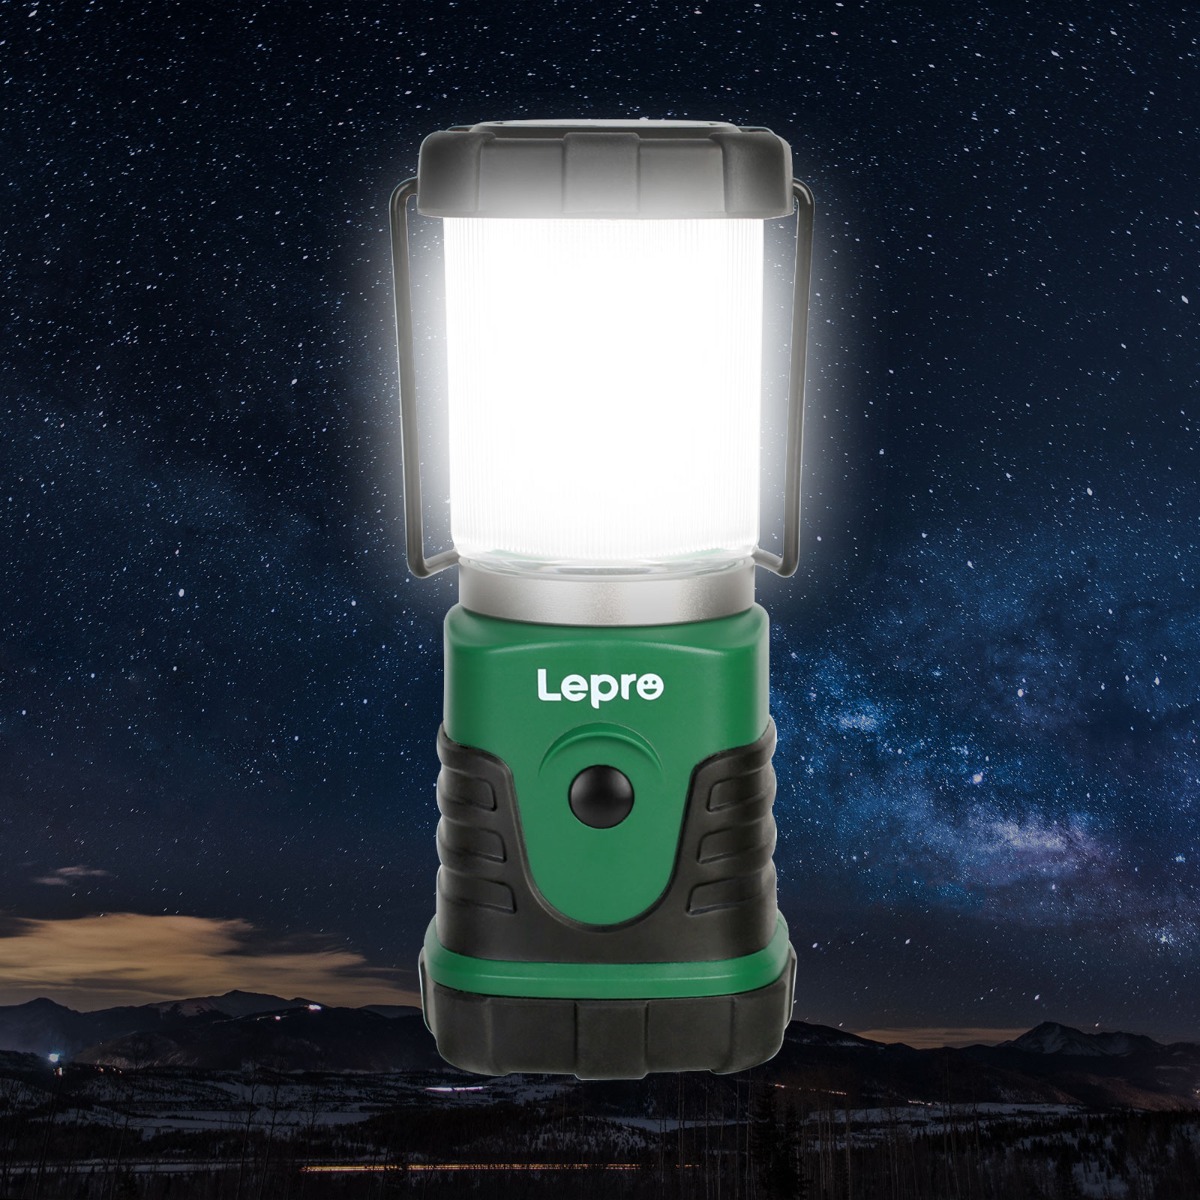  Lepro LED Camping Lantern Rechargeable, 1600LM, 4